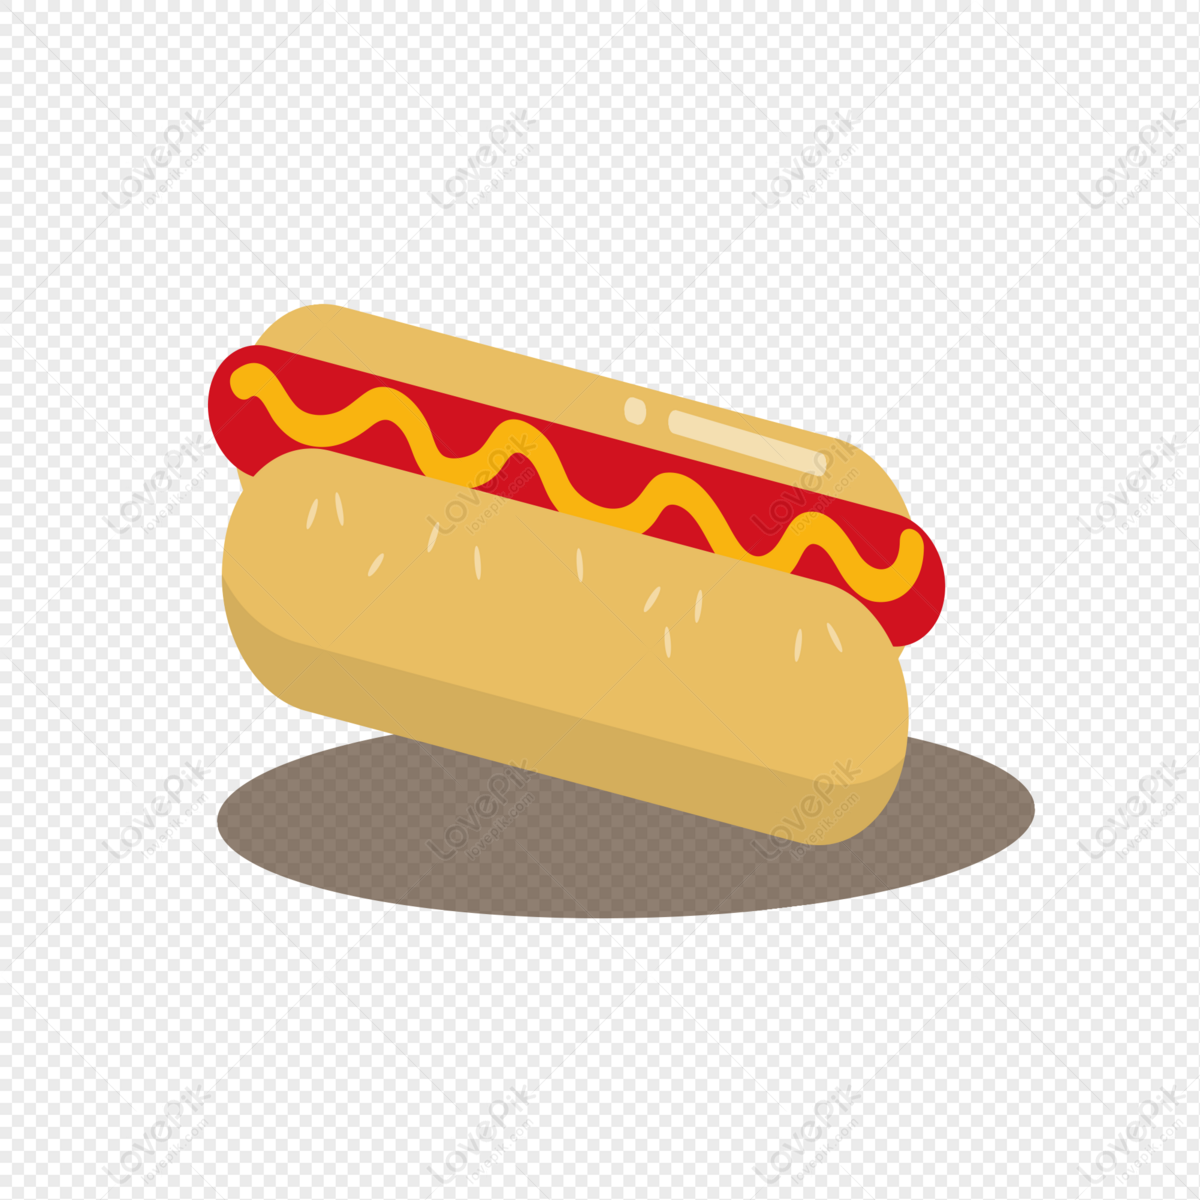 Hot Dog Png Transparent Background And Clipart Image For Free Download -  Lovepik | 401091770